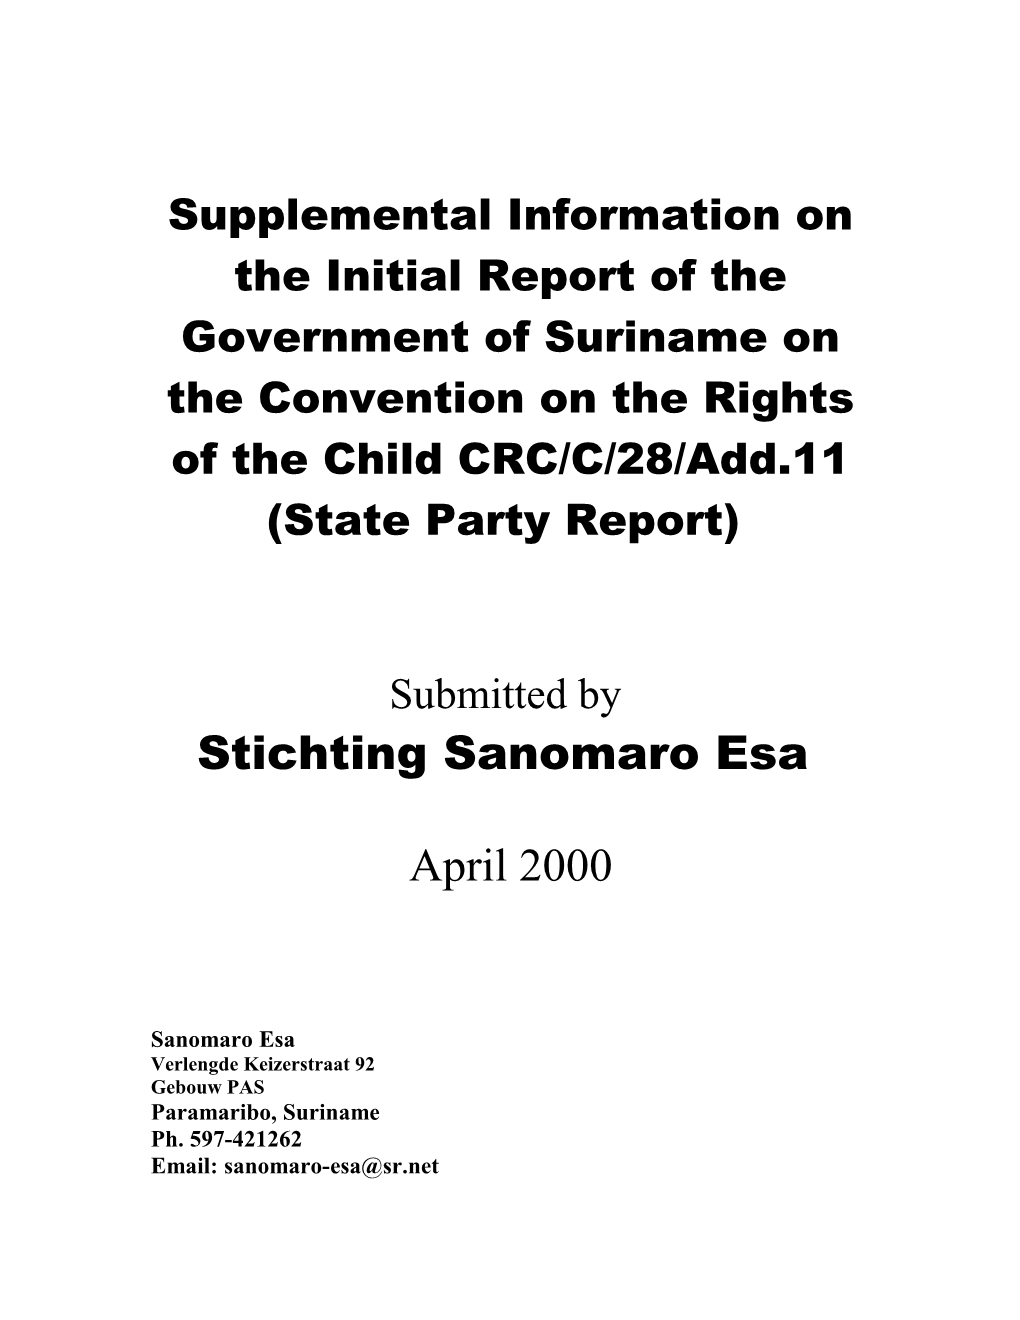 Supplemental Information on the Initial Report of the Government of Suriname on the Convention